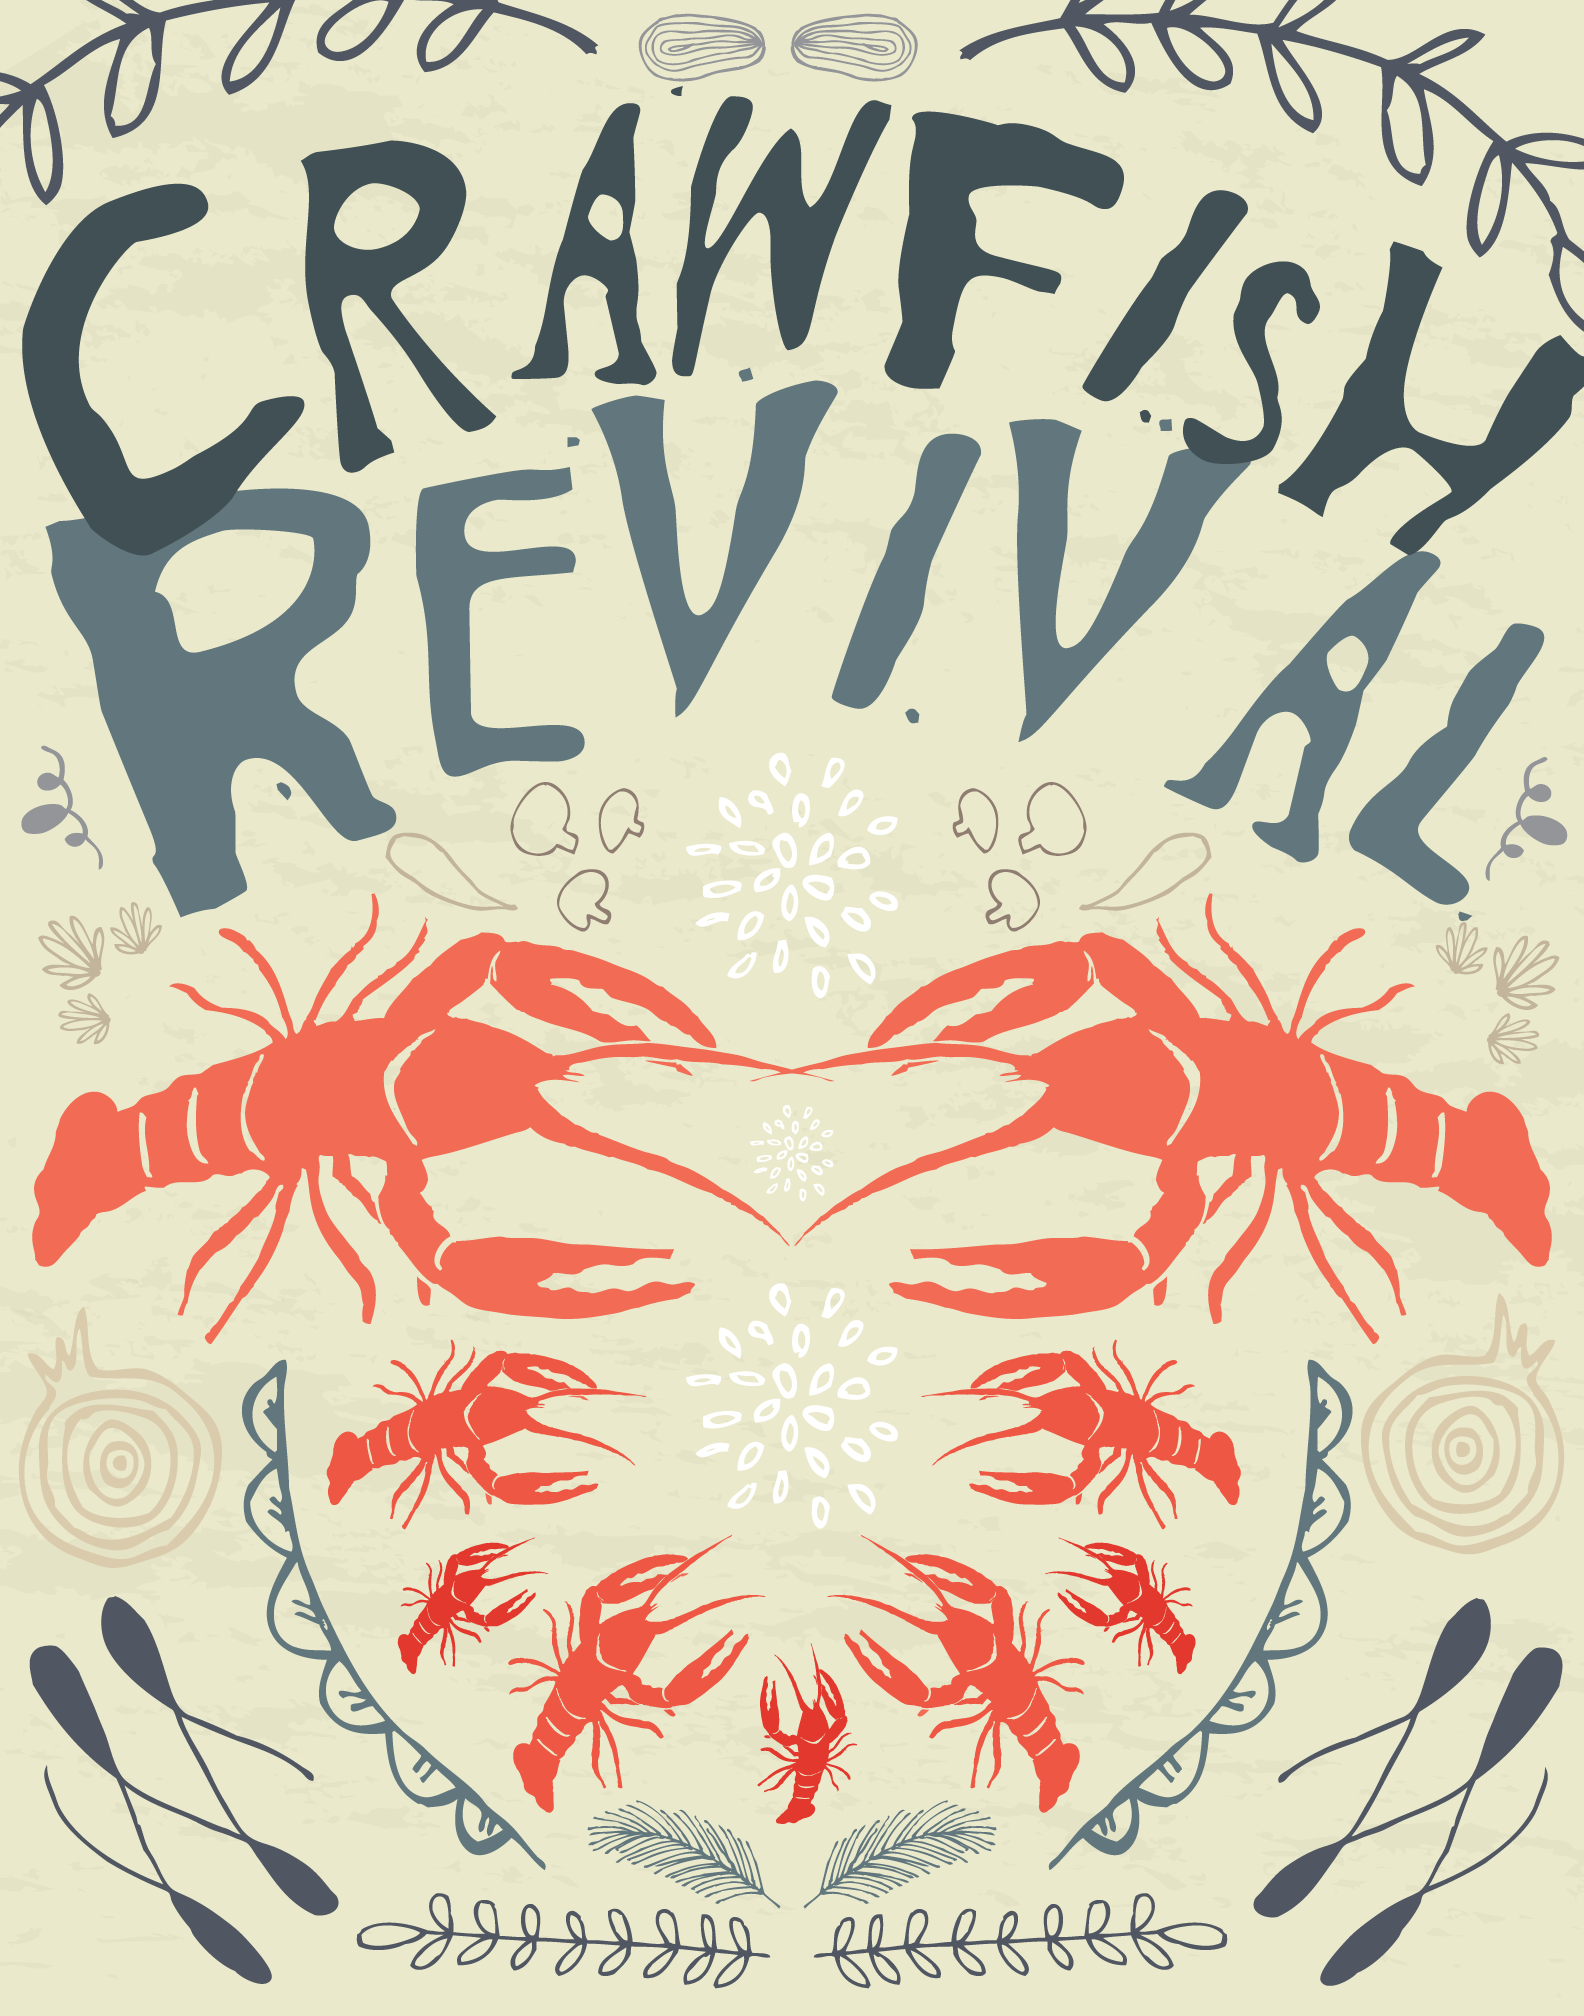 12TBMS004_Crawfish_Poster_22x28_R3.png